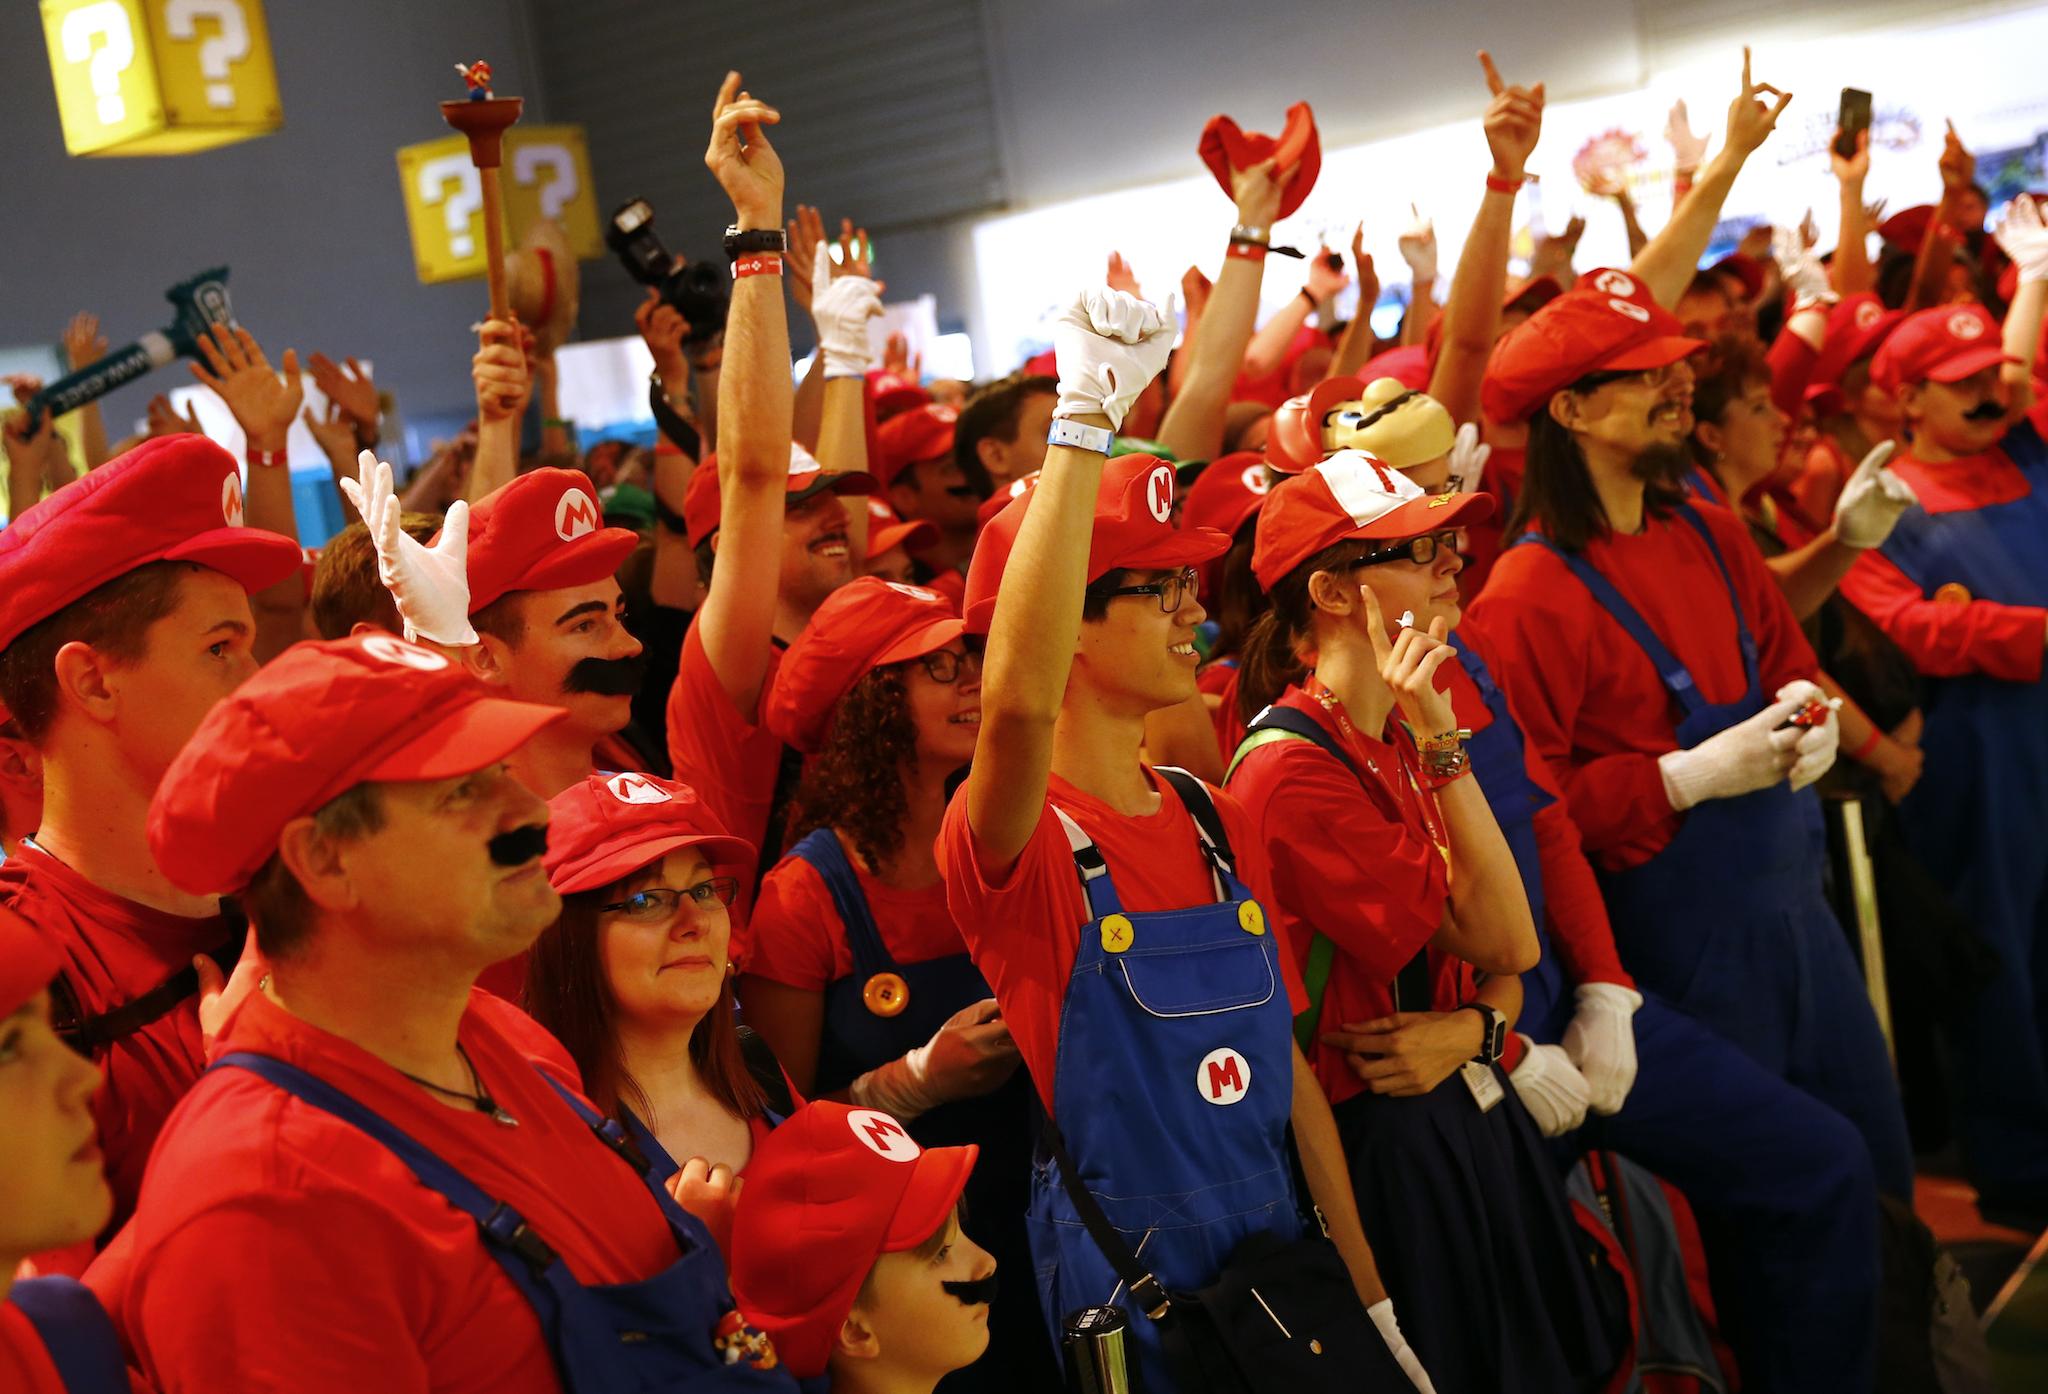 Cosplayers dressed as character "Mario" celebrate the 30th anniversary of "Super Mario Bros." video games developed by Nintendo during the Gamescom 2015 fair in Cologne, Germany August 6, 2015